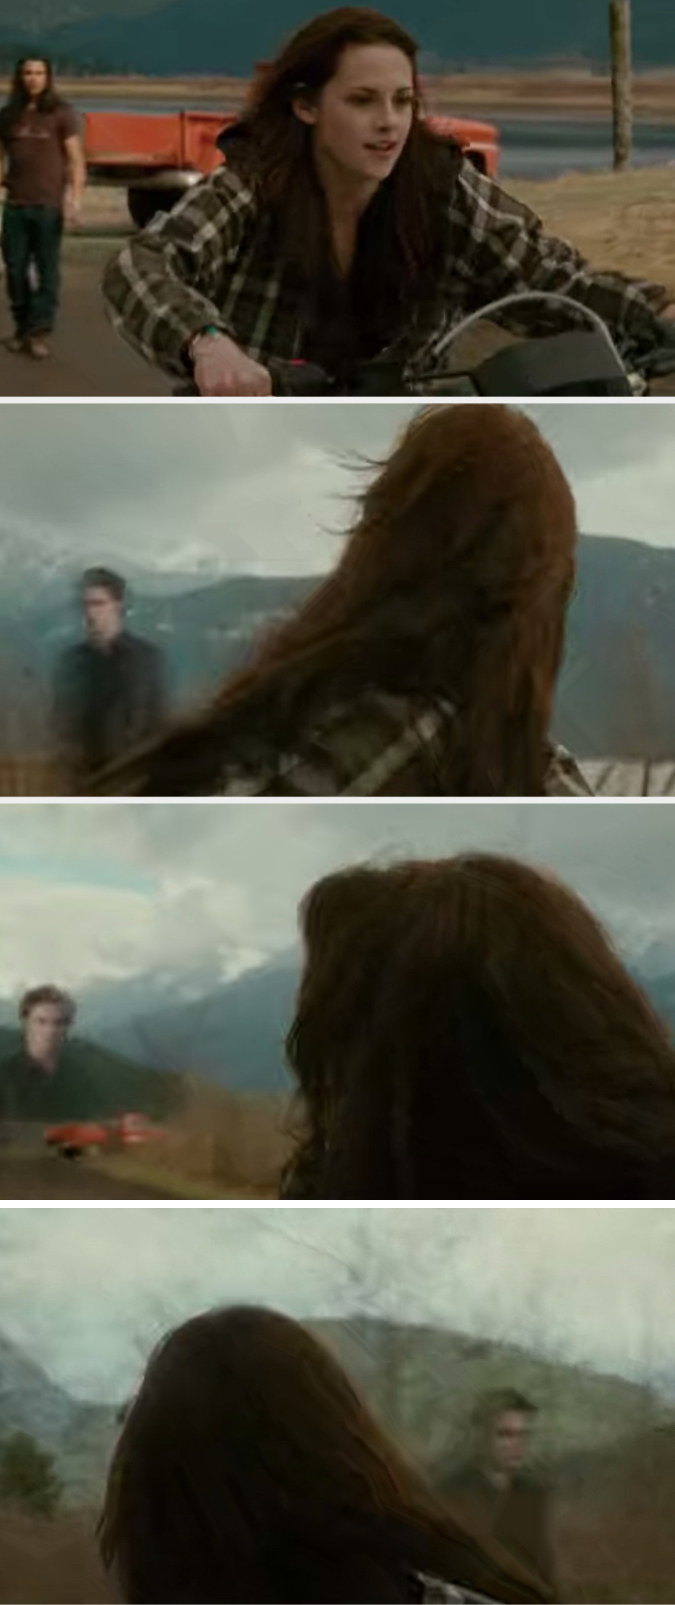 In the New Moon movie, Bella sees Ghost Edward a bunch while she&#x27;s riding the motorcycle